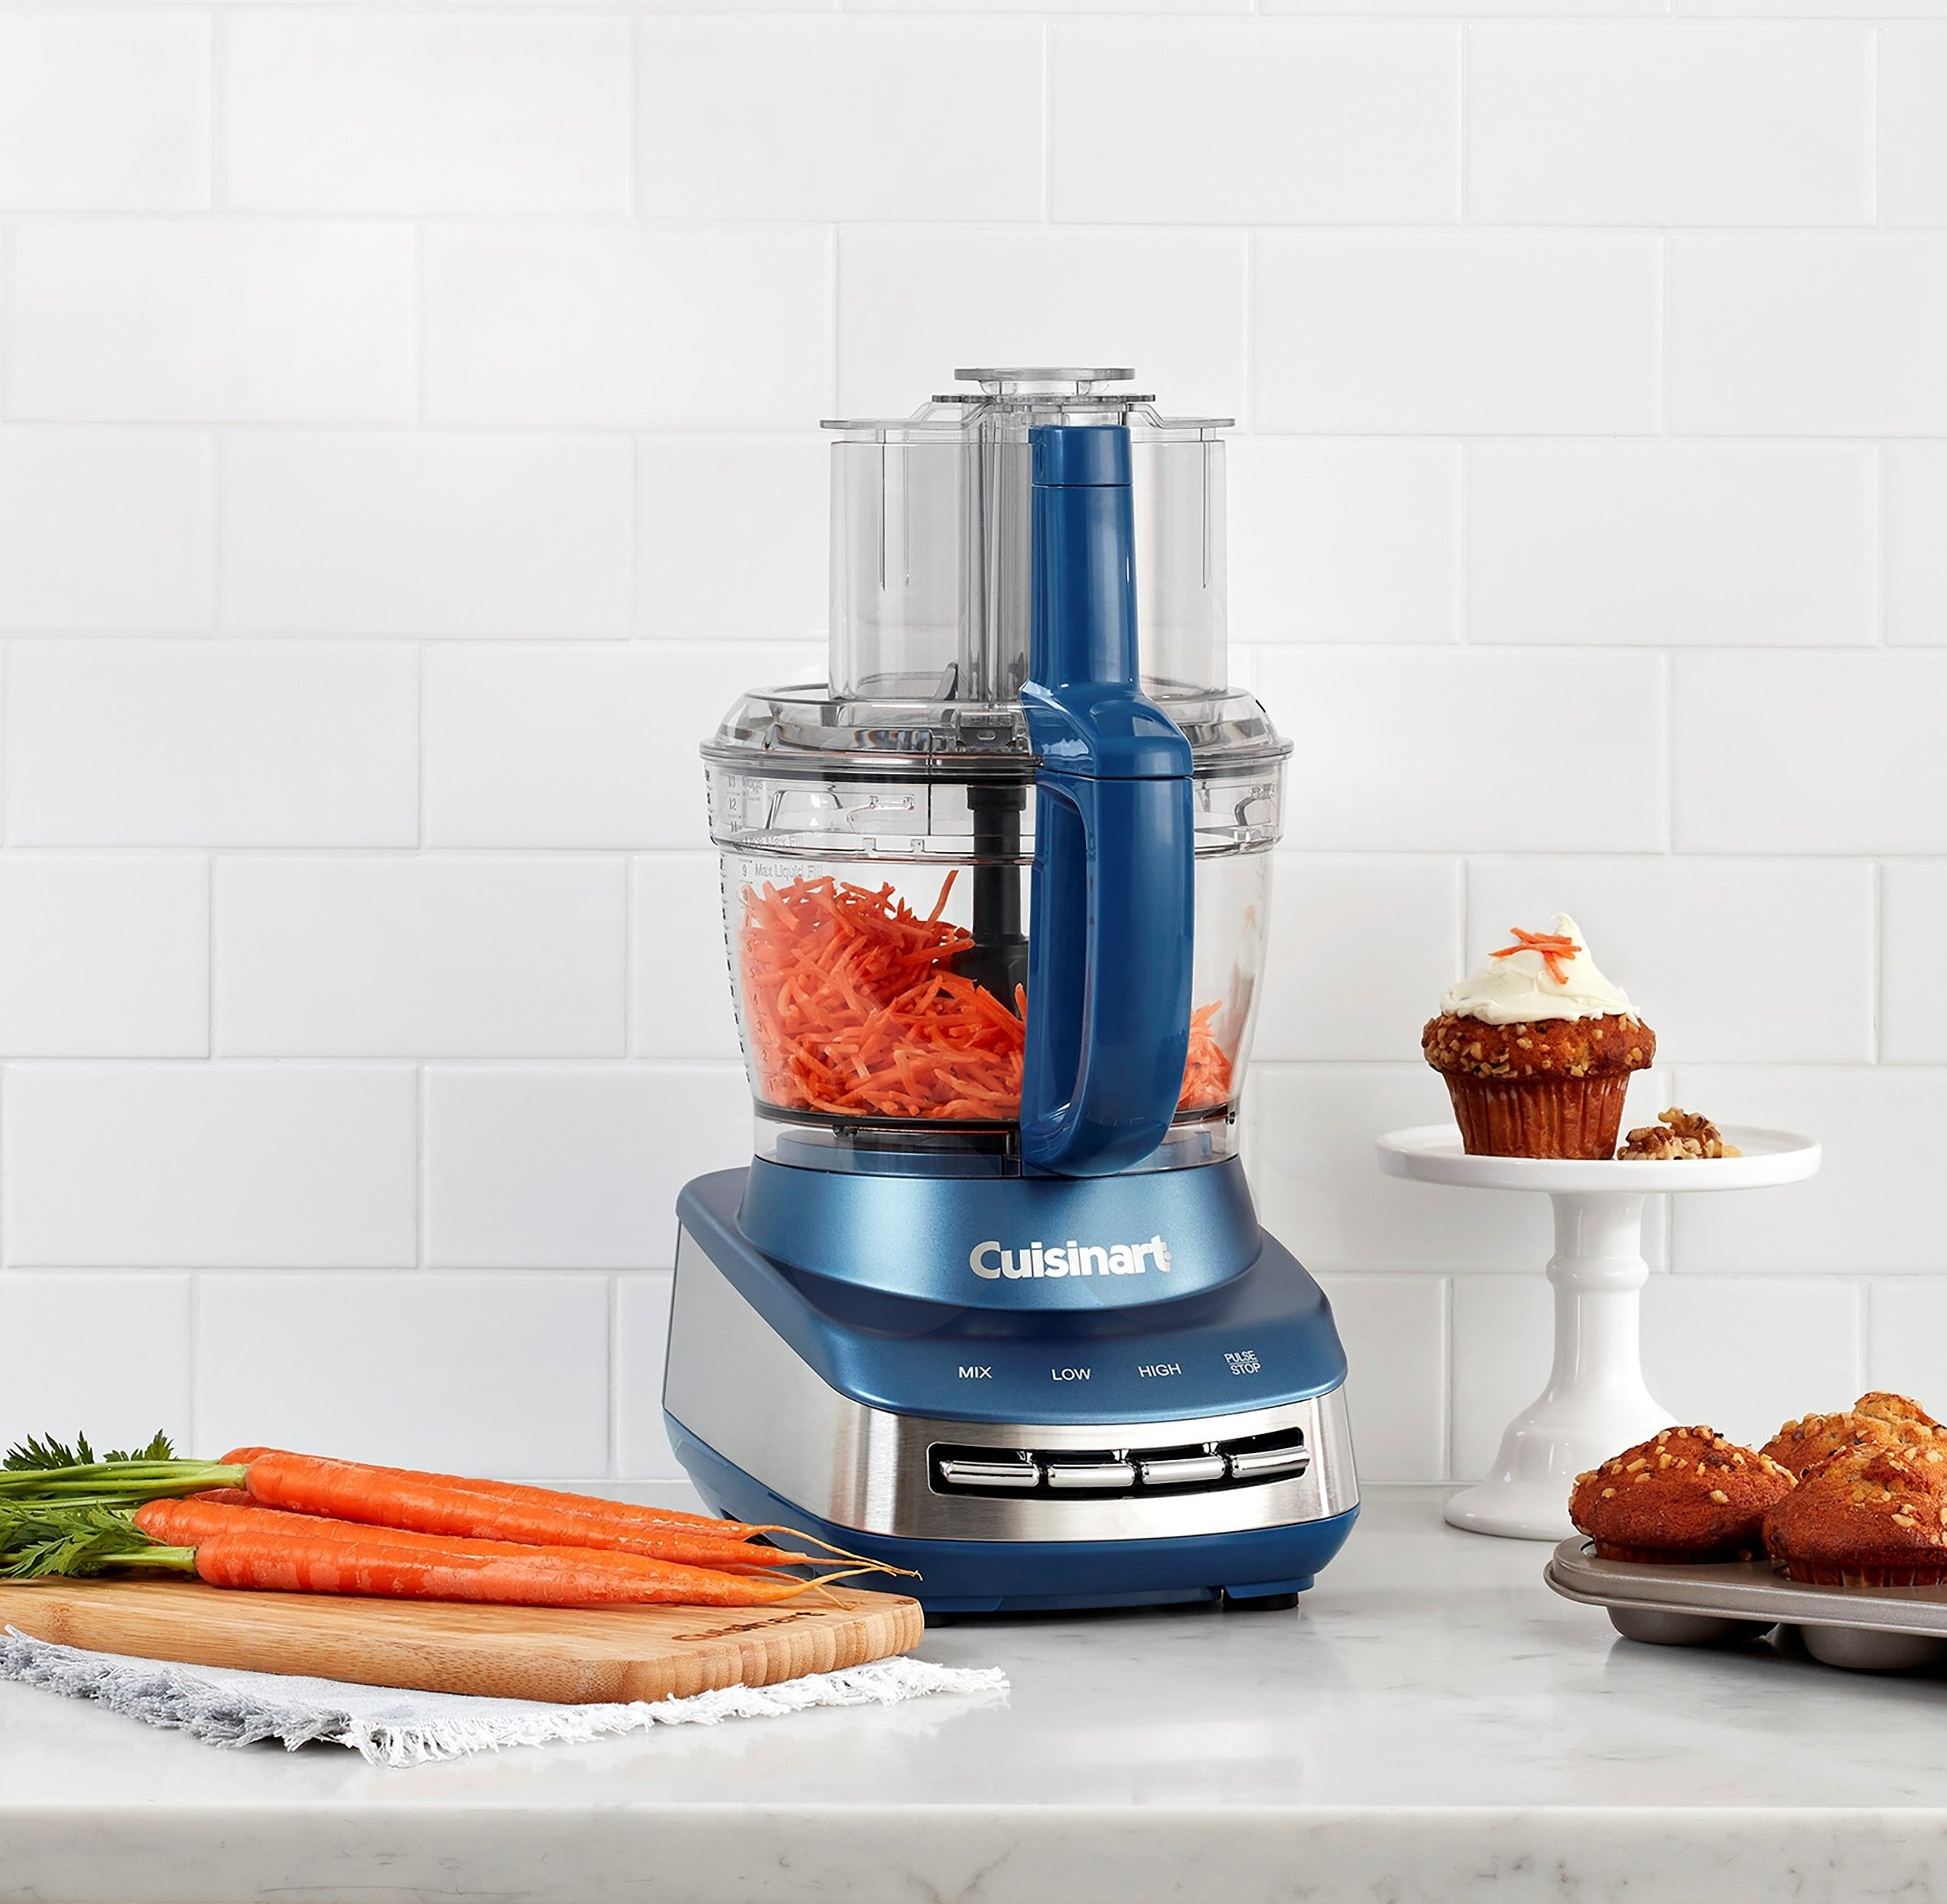 https://www.cuisinart.com/globalassets/cuisinart-image-feed/fp-130mb/fp130mb_ff_lifestyle_cropped.jpg